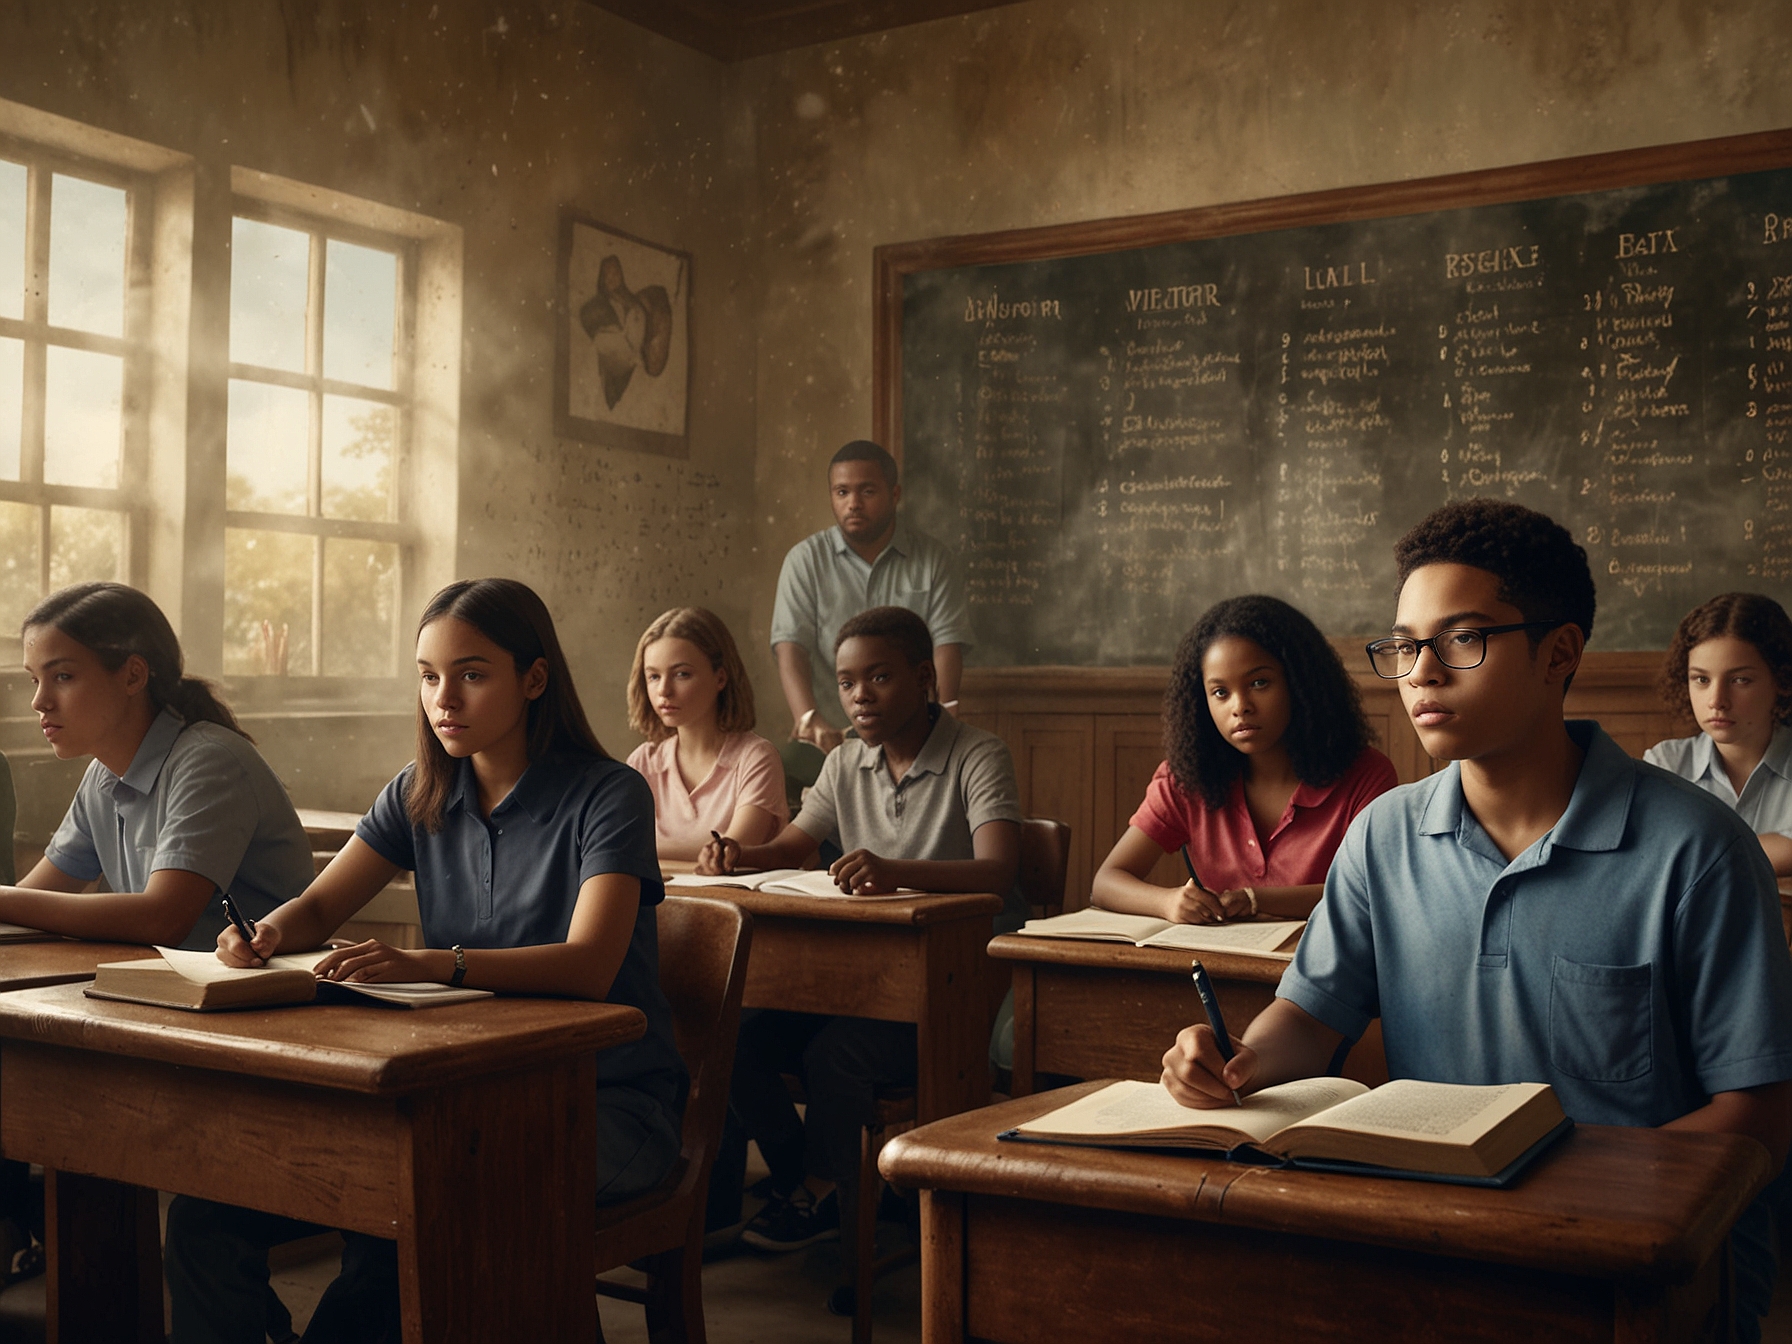 Image of diverse students in a classroom with a faded overlay of the Ten Commandments, representing the controversy over religious symbols in public educational settings.